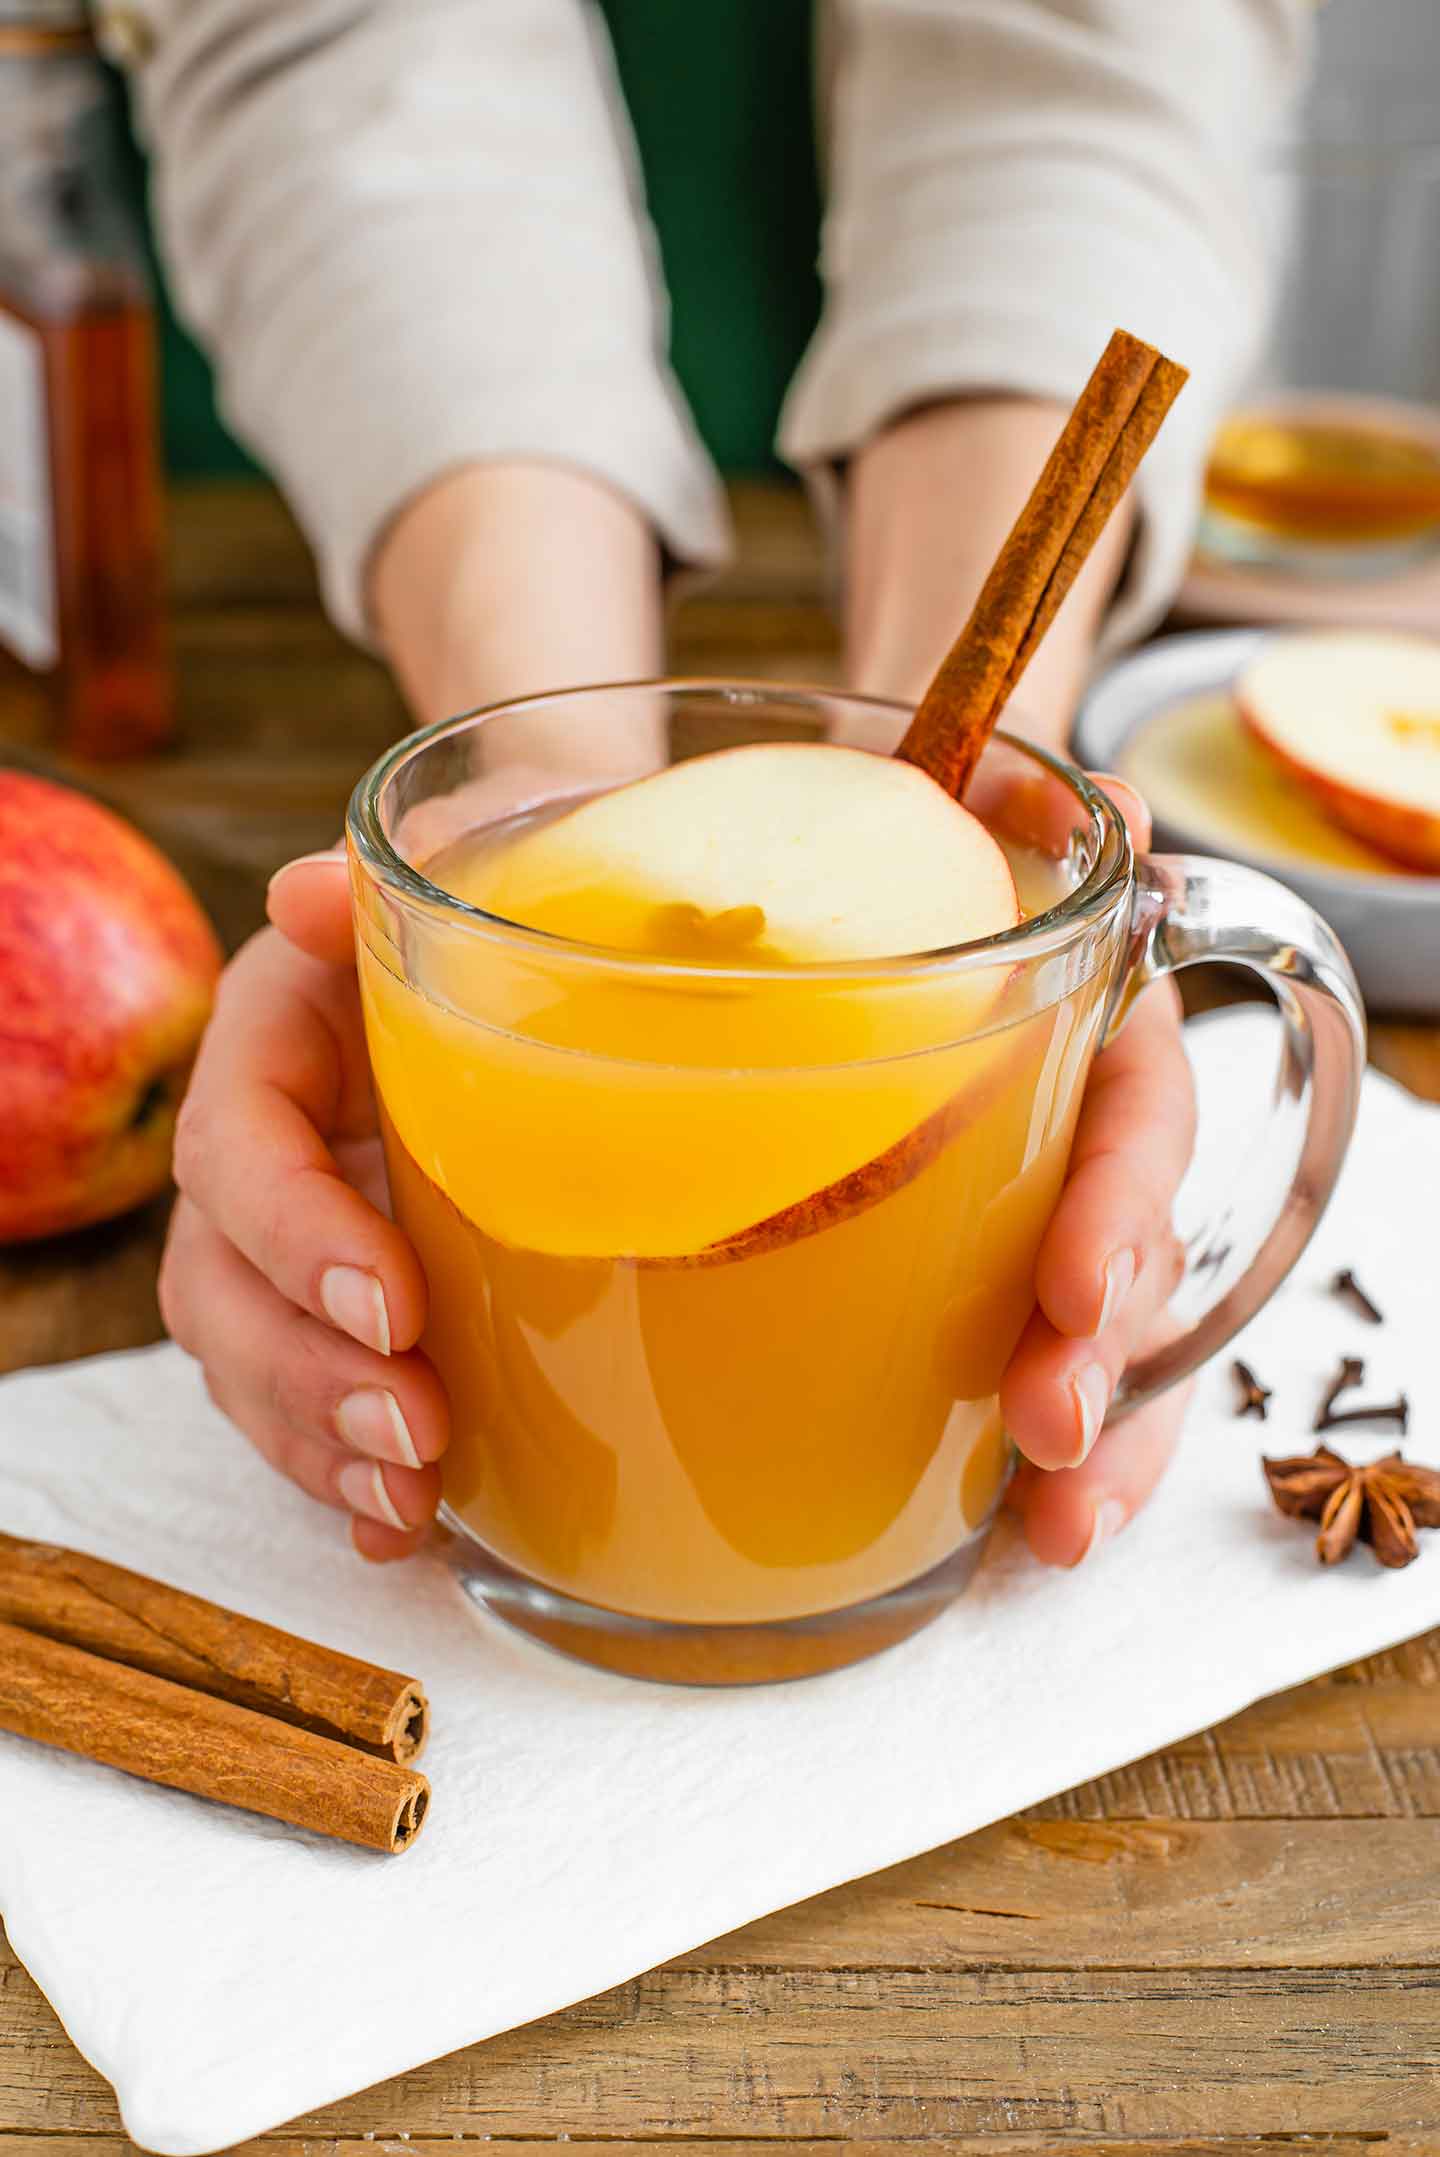 Side view of hands wrapped around a warm glass mug of hot apple cider wassail. A slice of apple and a cinnamon stick garnish the drink.